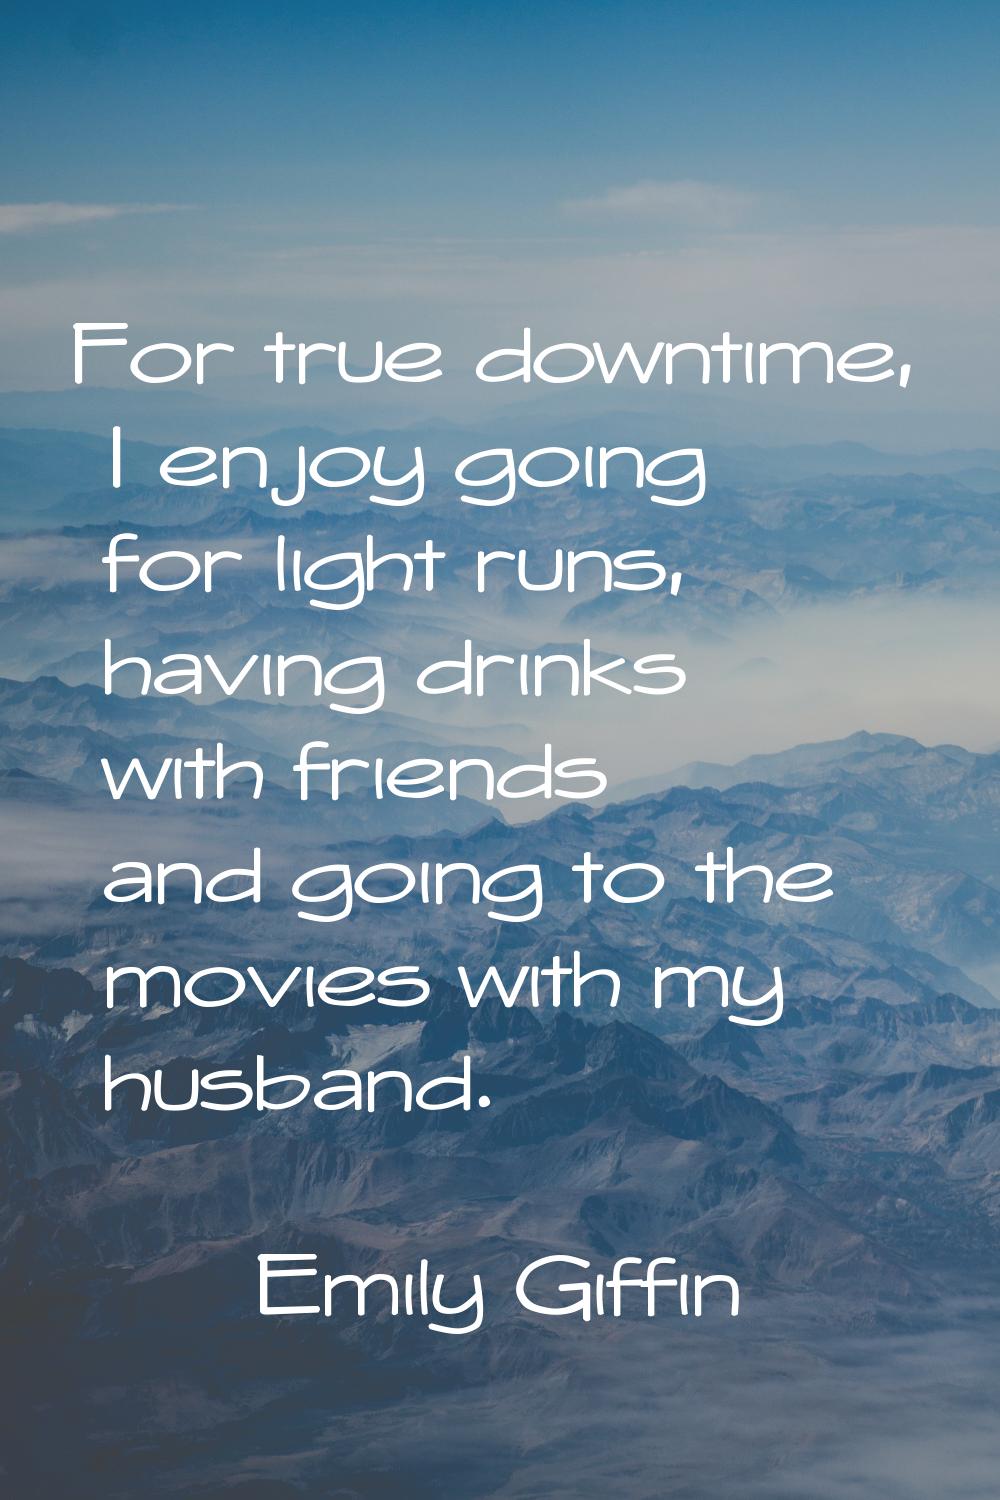 For true downtime, I enjoy going for light runs, having drinks with friends and going to the movies